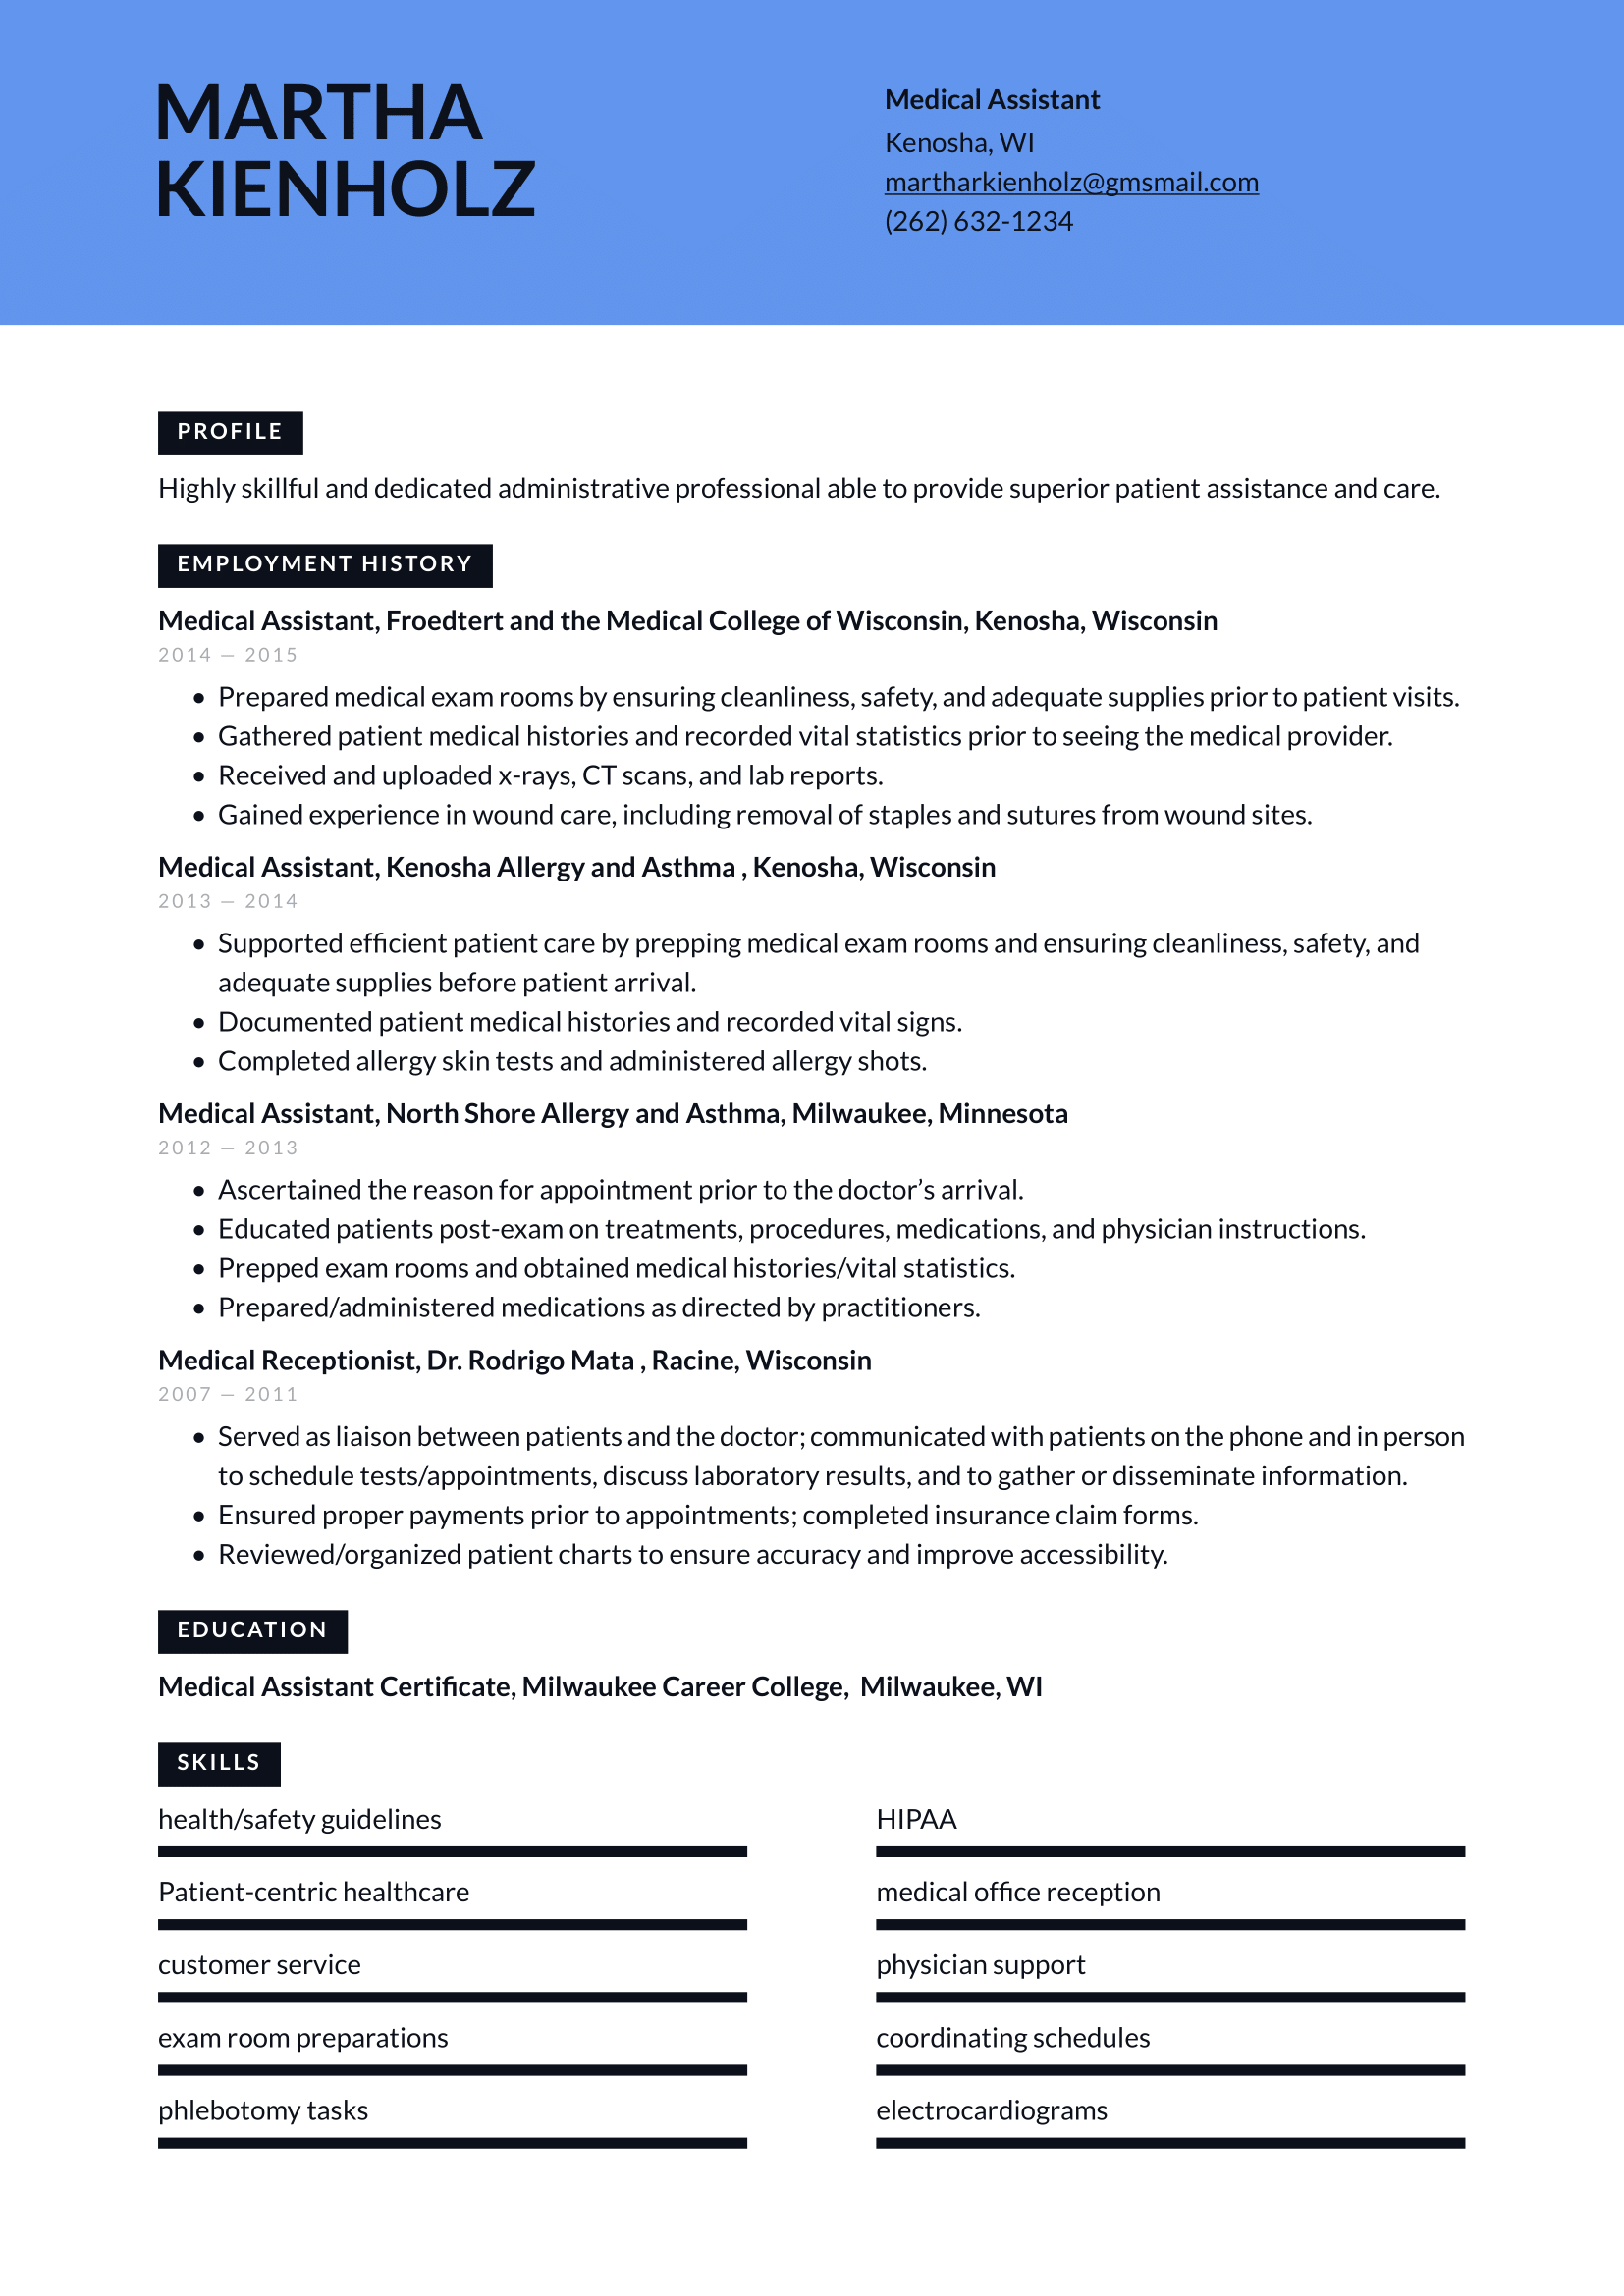 Medical Assistant Resume Example & Writing Guide